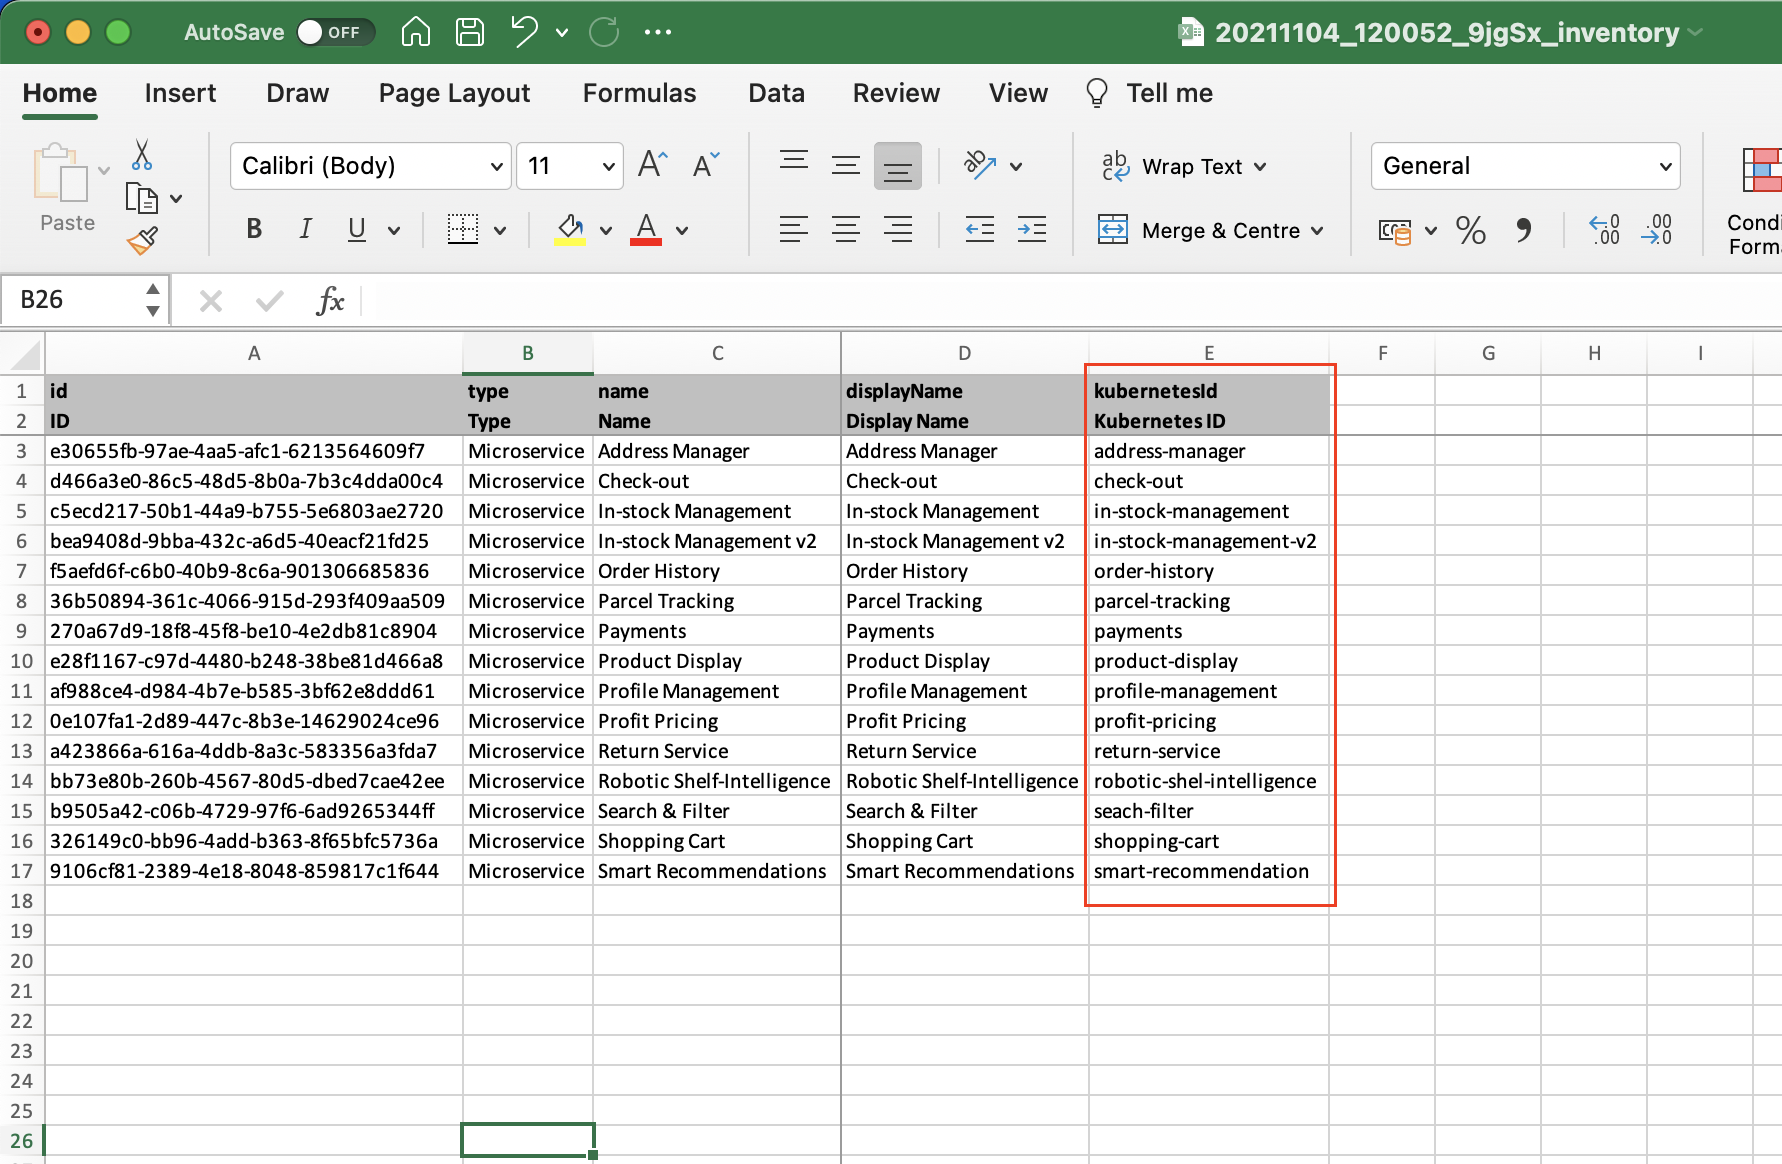 Mapping completed in Excel.